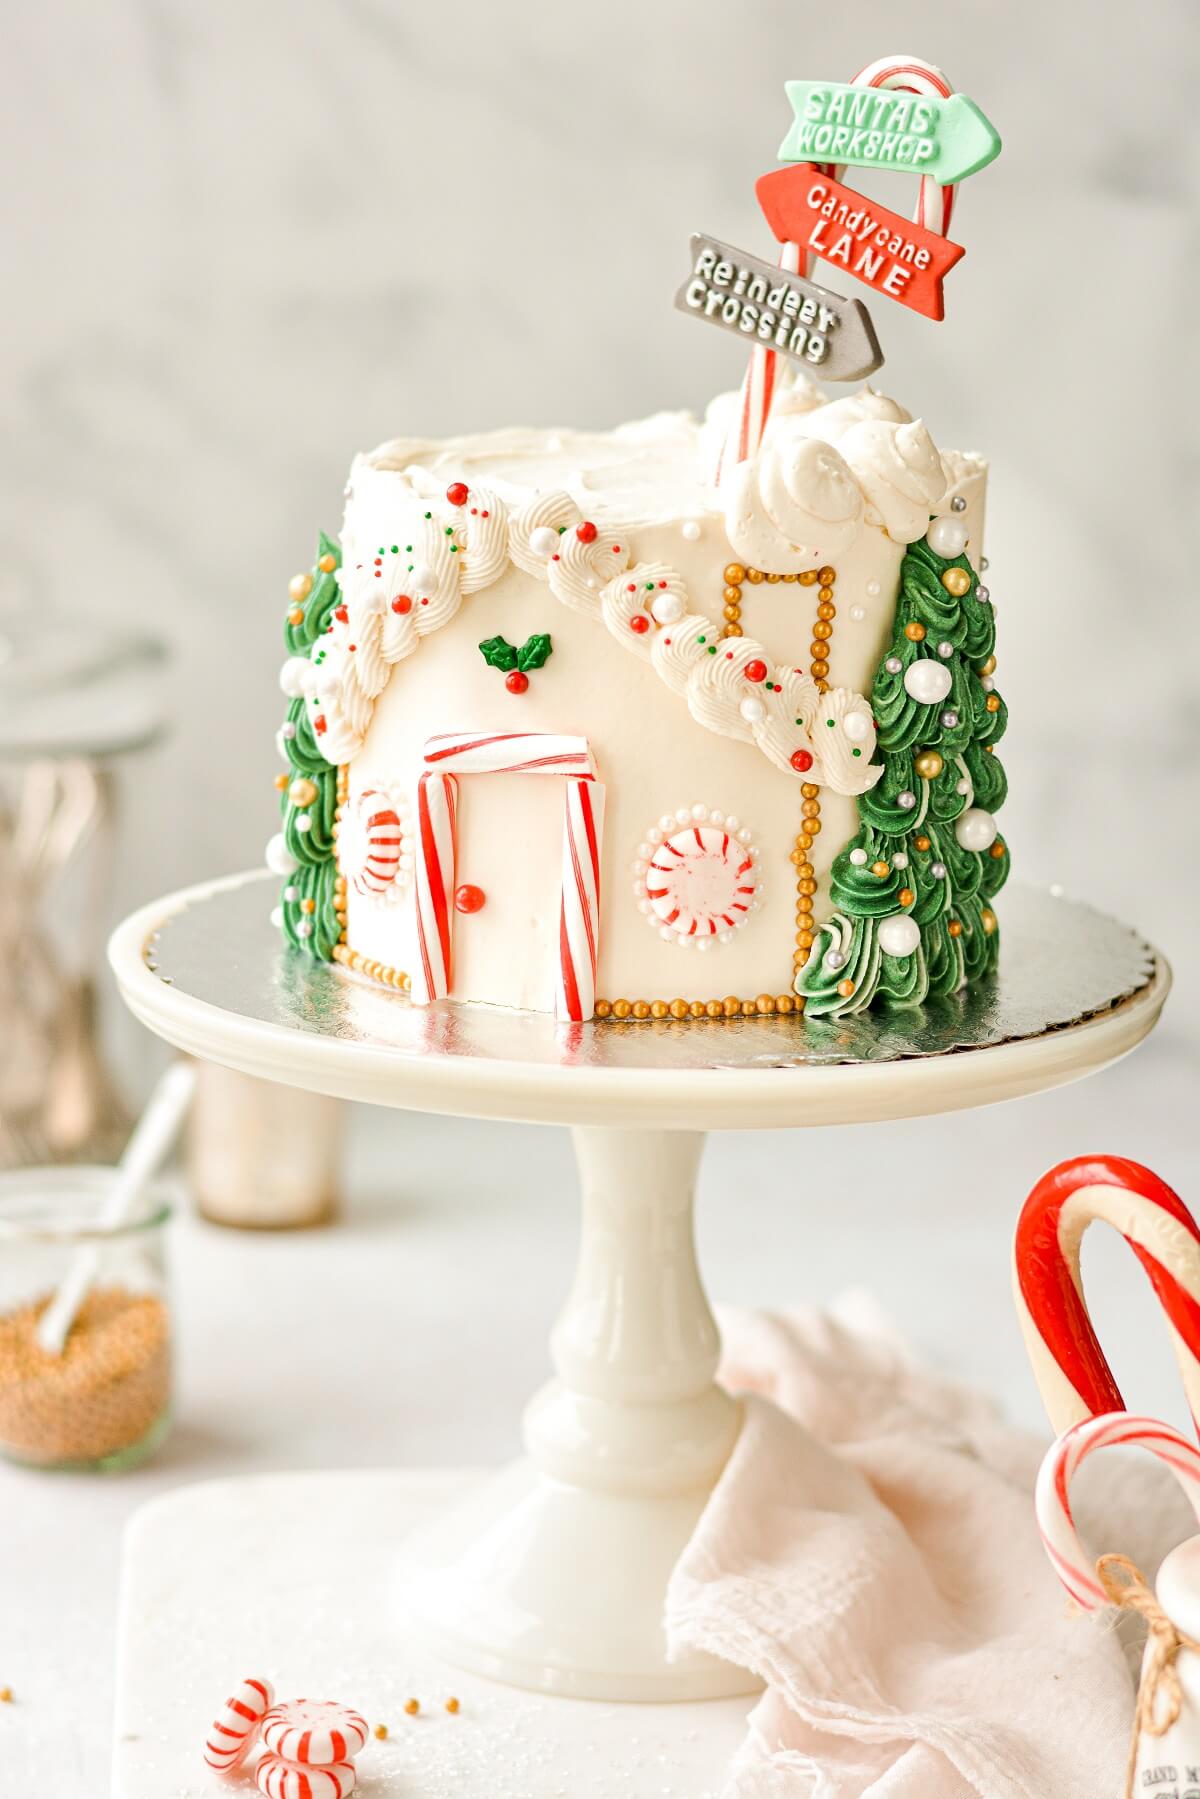 A Christmas cake decorated like Santa's workshop, and topped with a candy cane street sign.